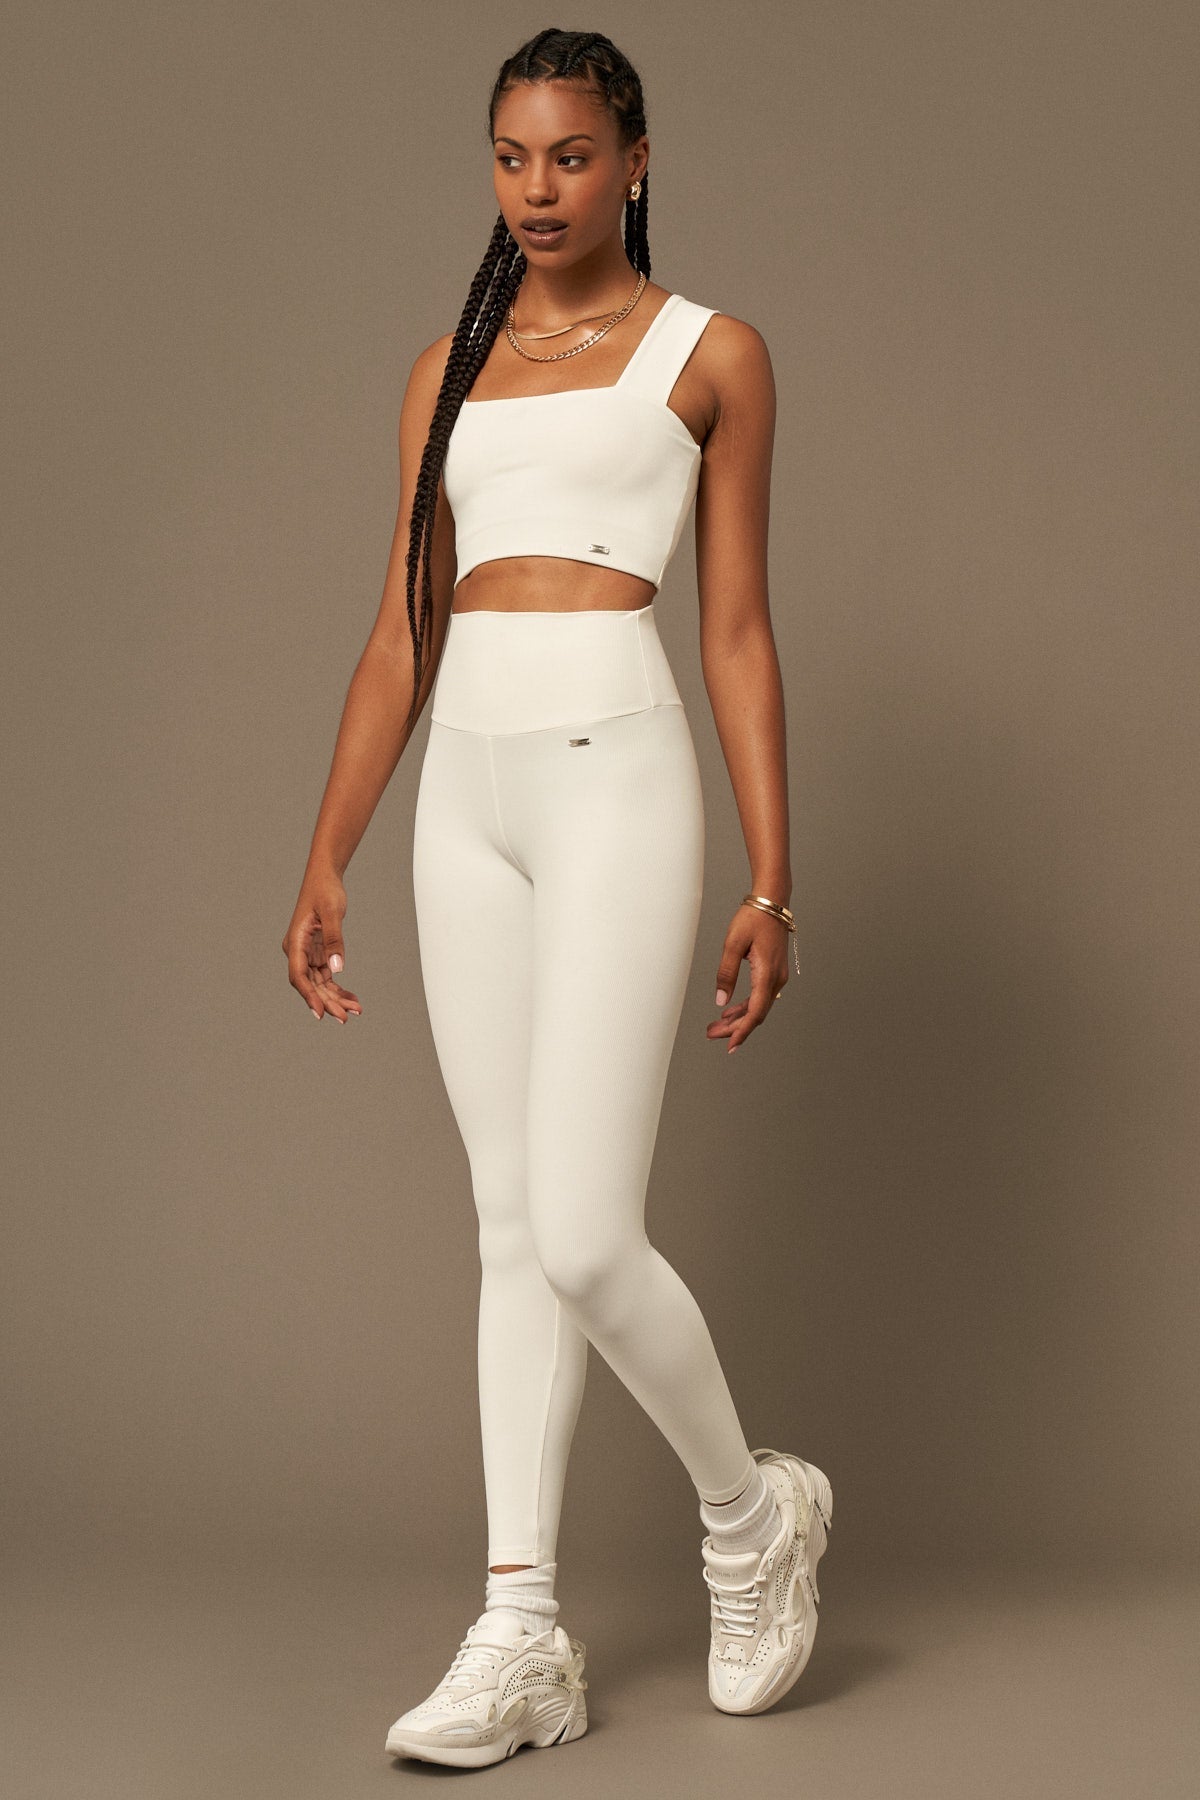 Daily Legging in Pearl White-Long Leggings-Store Clothing Sustainable Recycled Yoga Leggings Women's On-line Barcelona Believe Athletics Sustainable Recycled Yoga Clothes